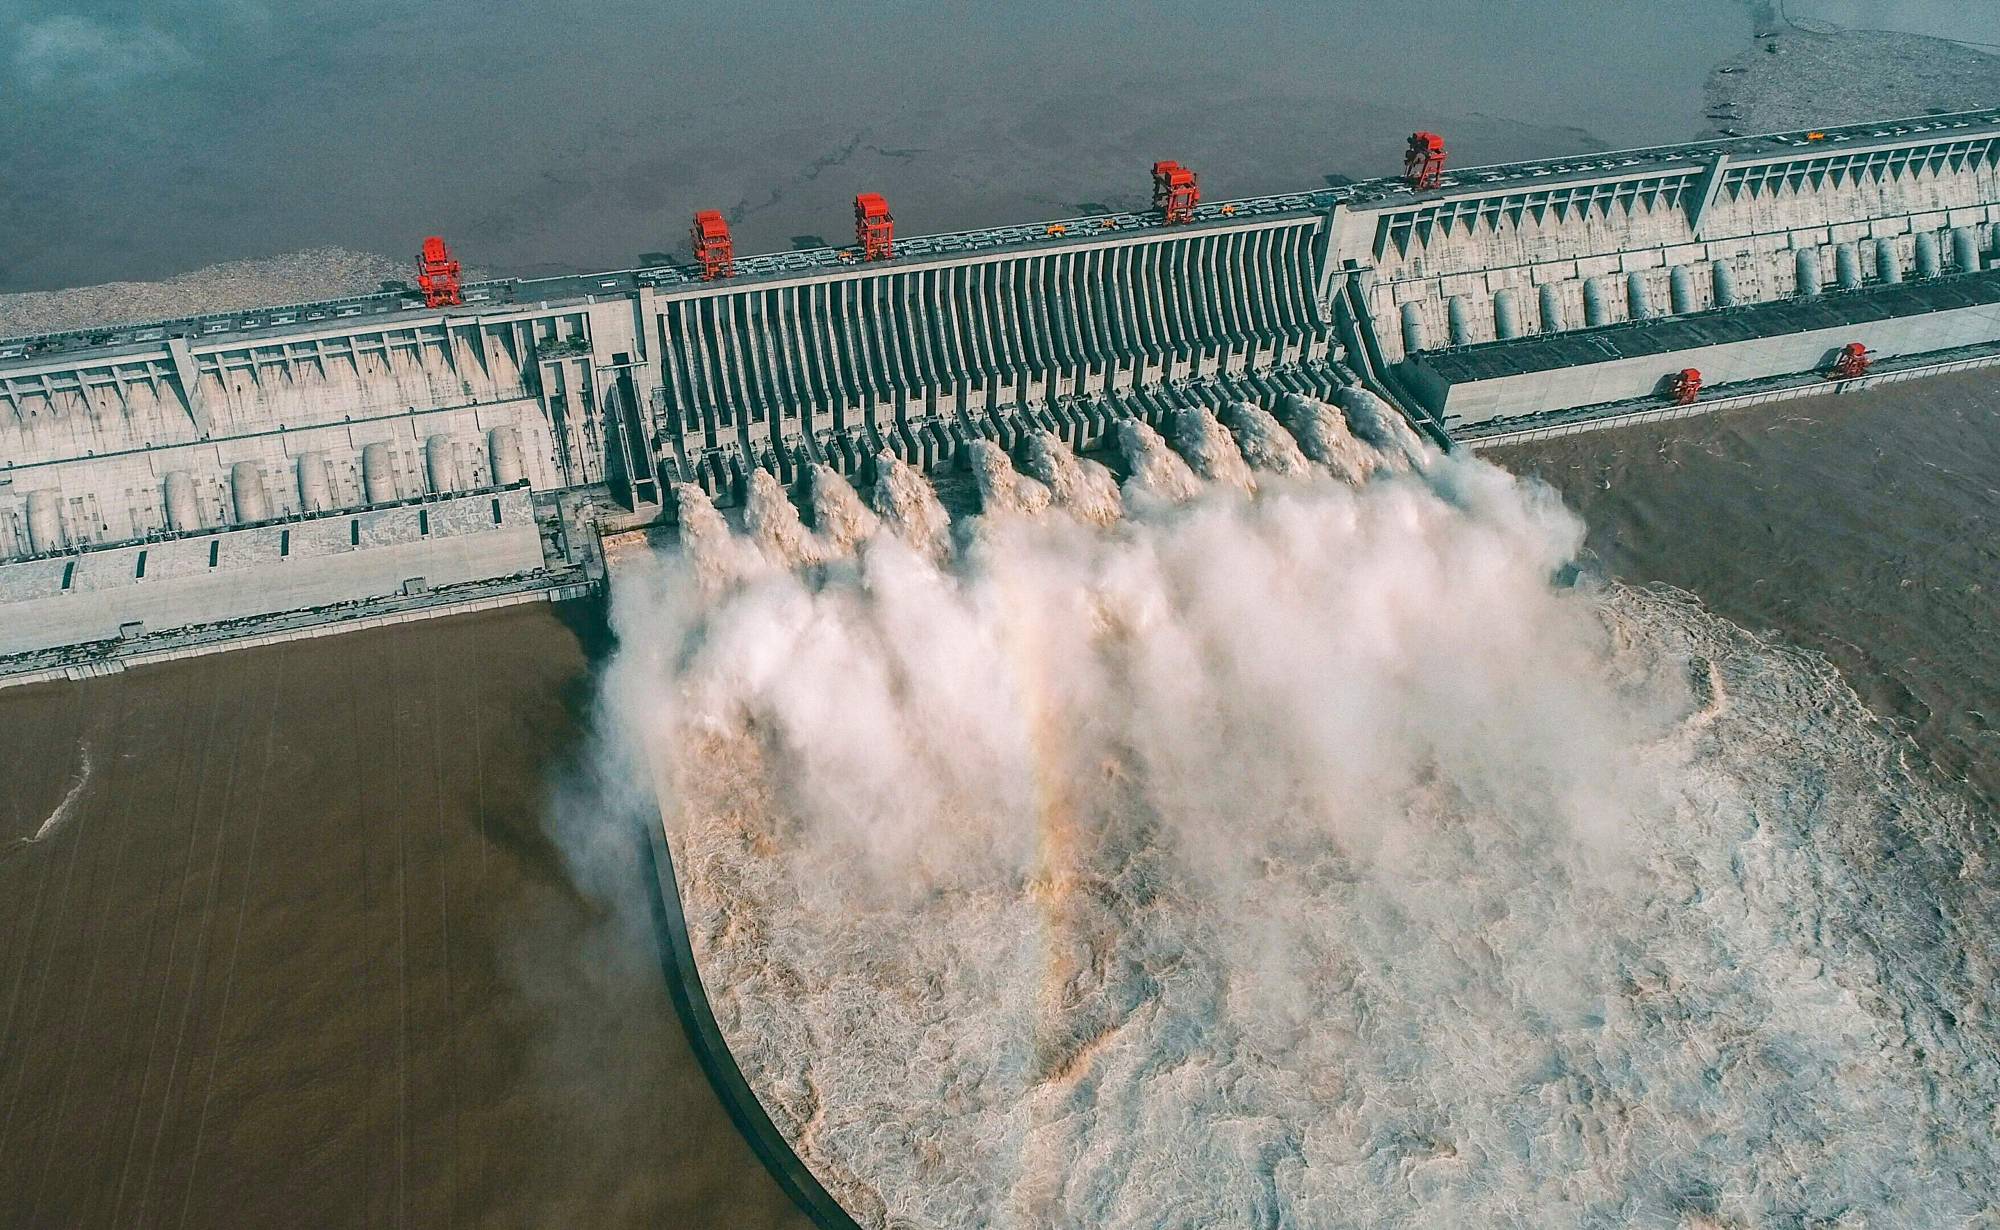 This aerial photo taken on Aug. 23 shows water being released from China's Three Gorges Dam in Yichang, Hubei province. | AFP-JIJI